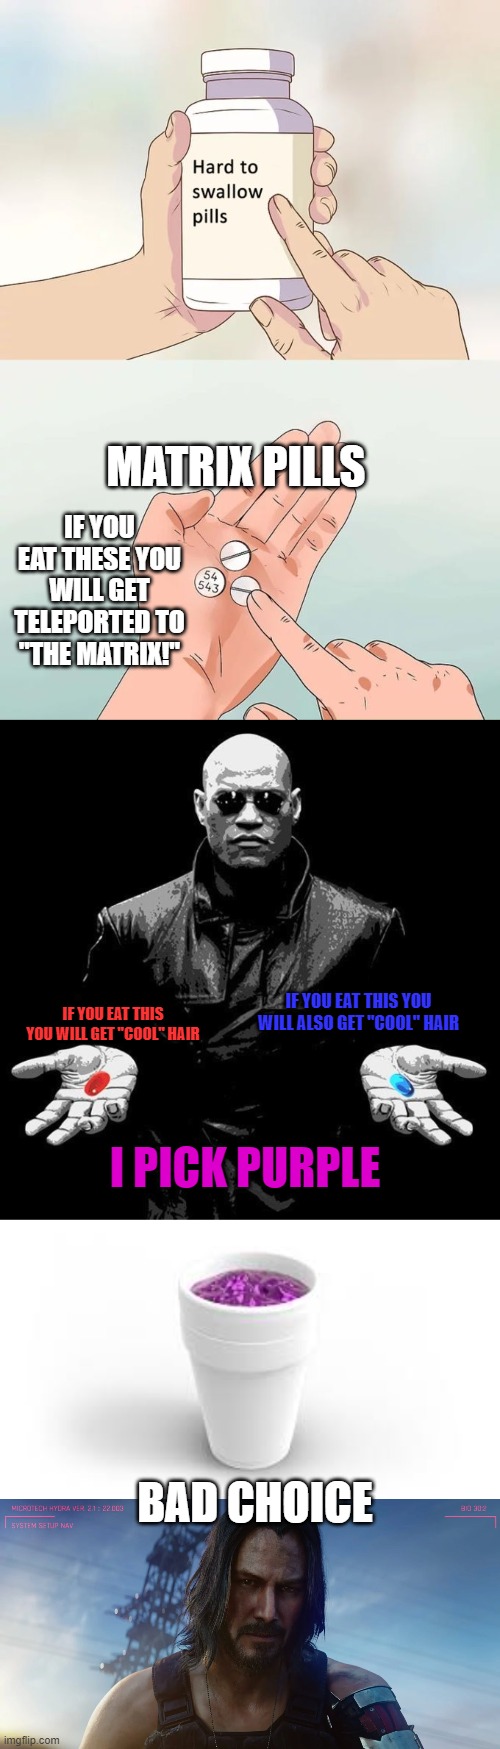 MATRIX PILLS; IF YOU EAT THESE YOU WILL GET TELEPORTED TO "THE MATRIX!"; IF YOU EAT THIS YOU WILL ALSO GET "COOL" HAIR; IF YOU EAT THIS YOU WILL GET "COOL" HAIR; I PICK PURPLE; BAD CHOICE | image tagged in memes,hard to swallow pills,morpheus pills,lean,cyberpunk 2077 | made w/ Imgflip meme maker